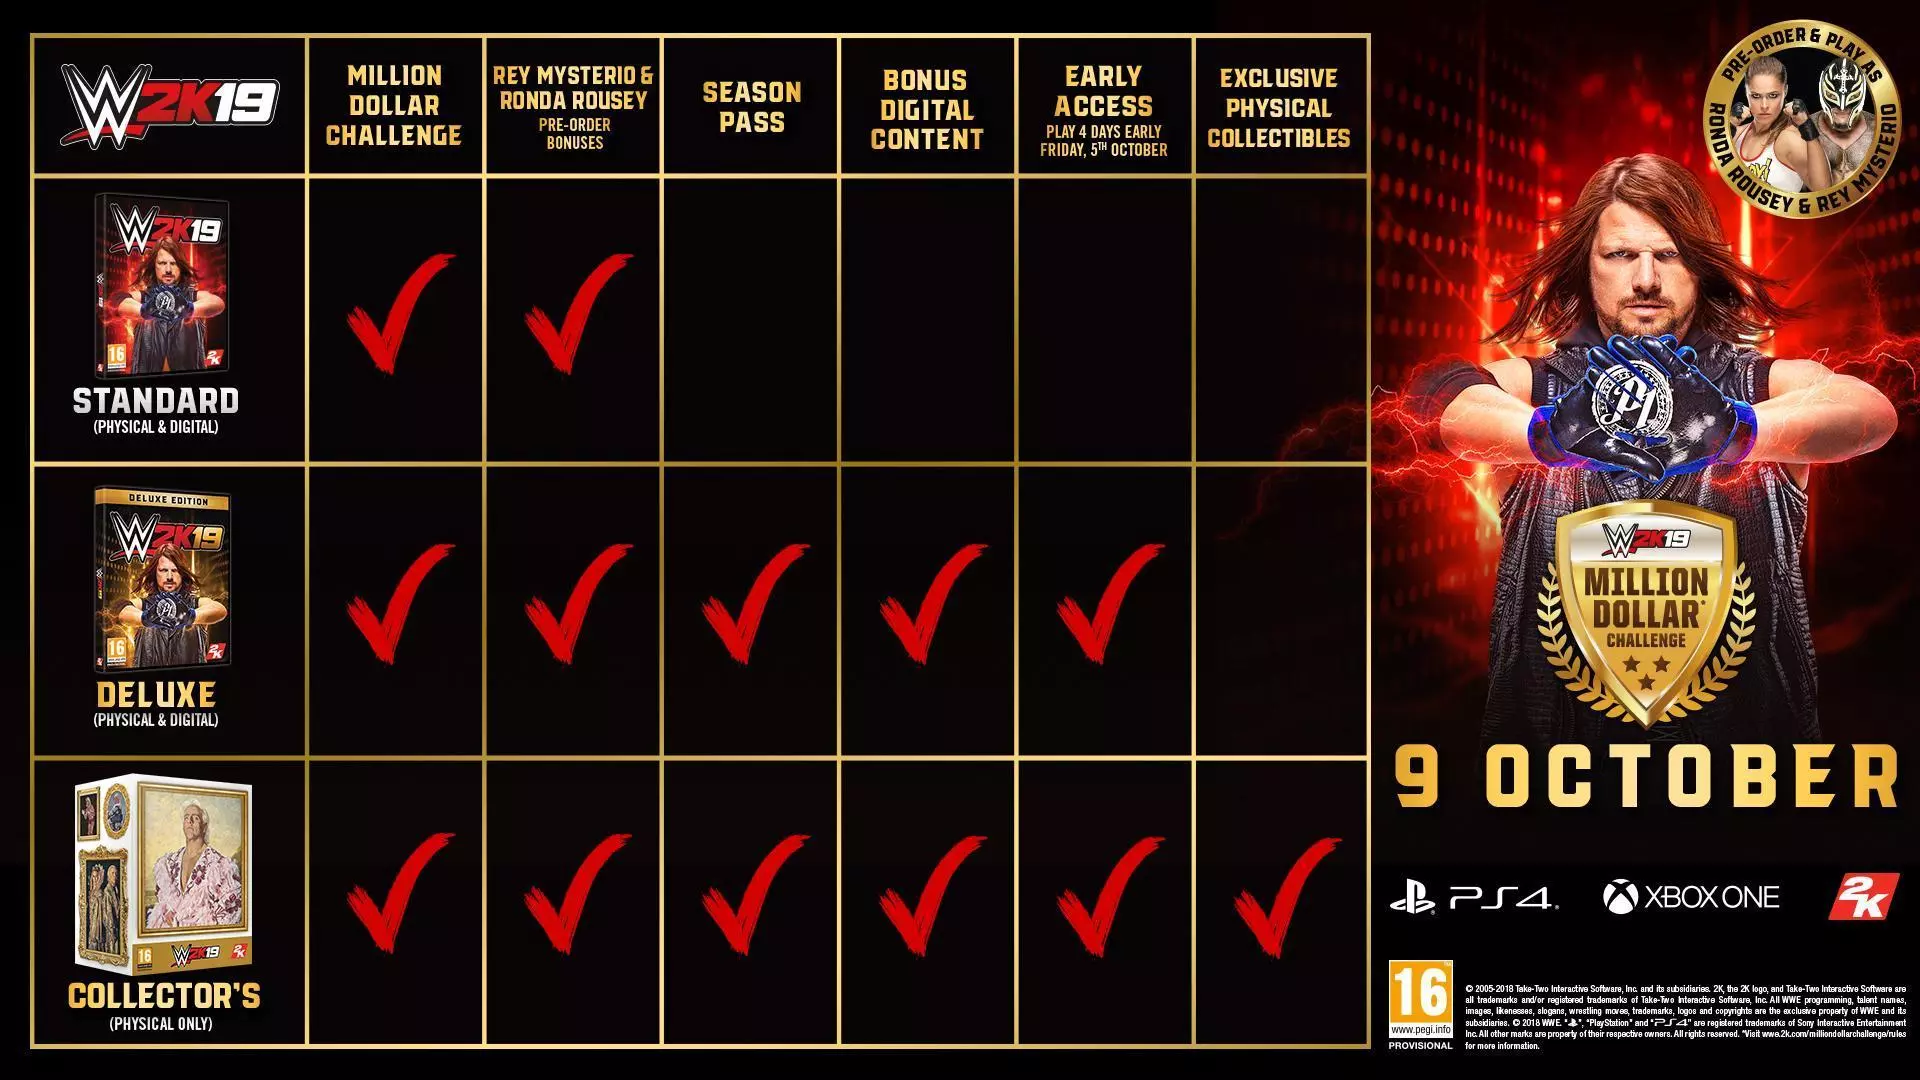 WWE 2K19 Game Editions Infographic - Standard Deluxe Collectors